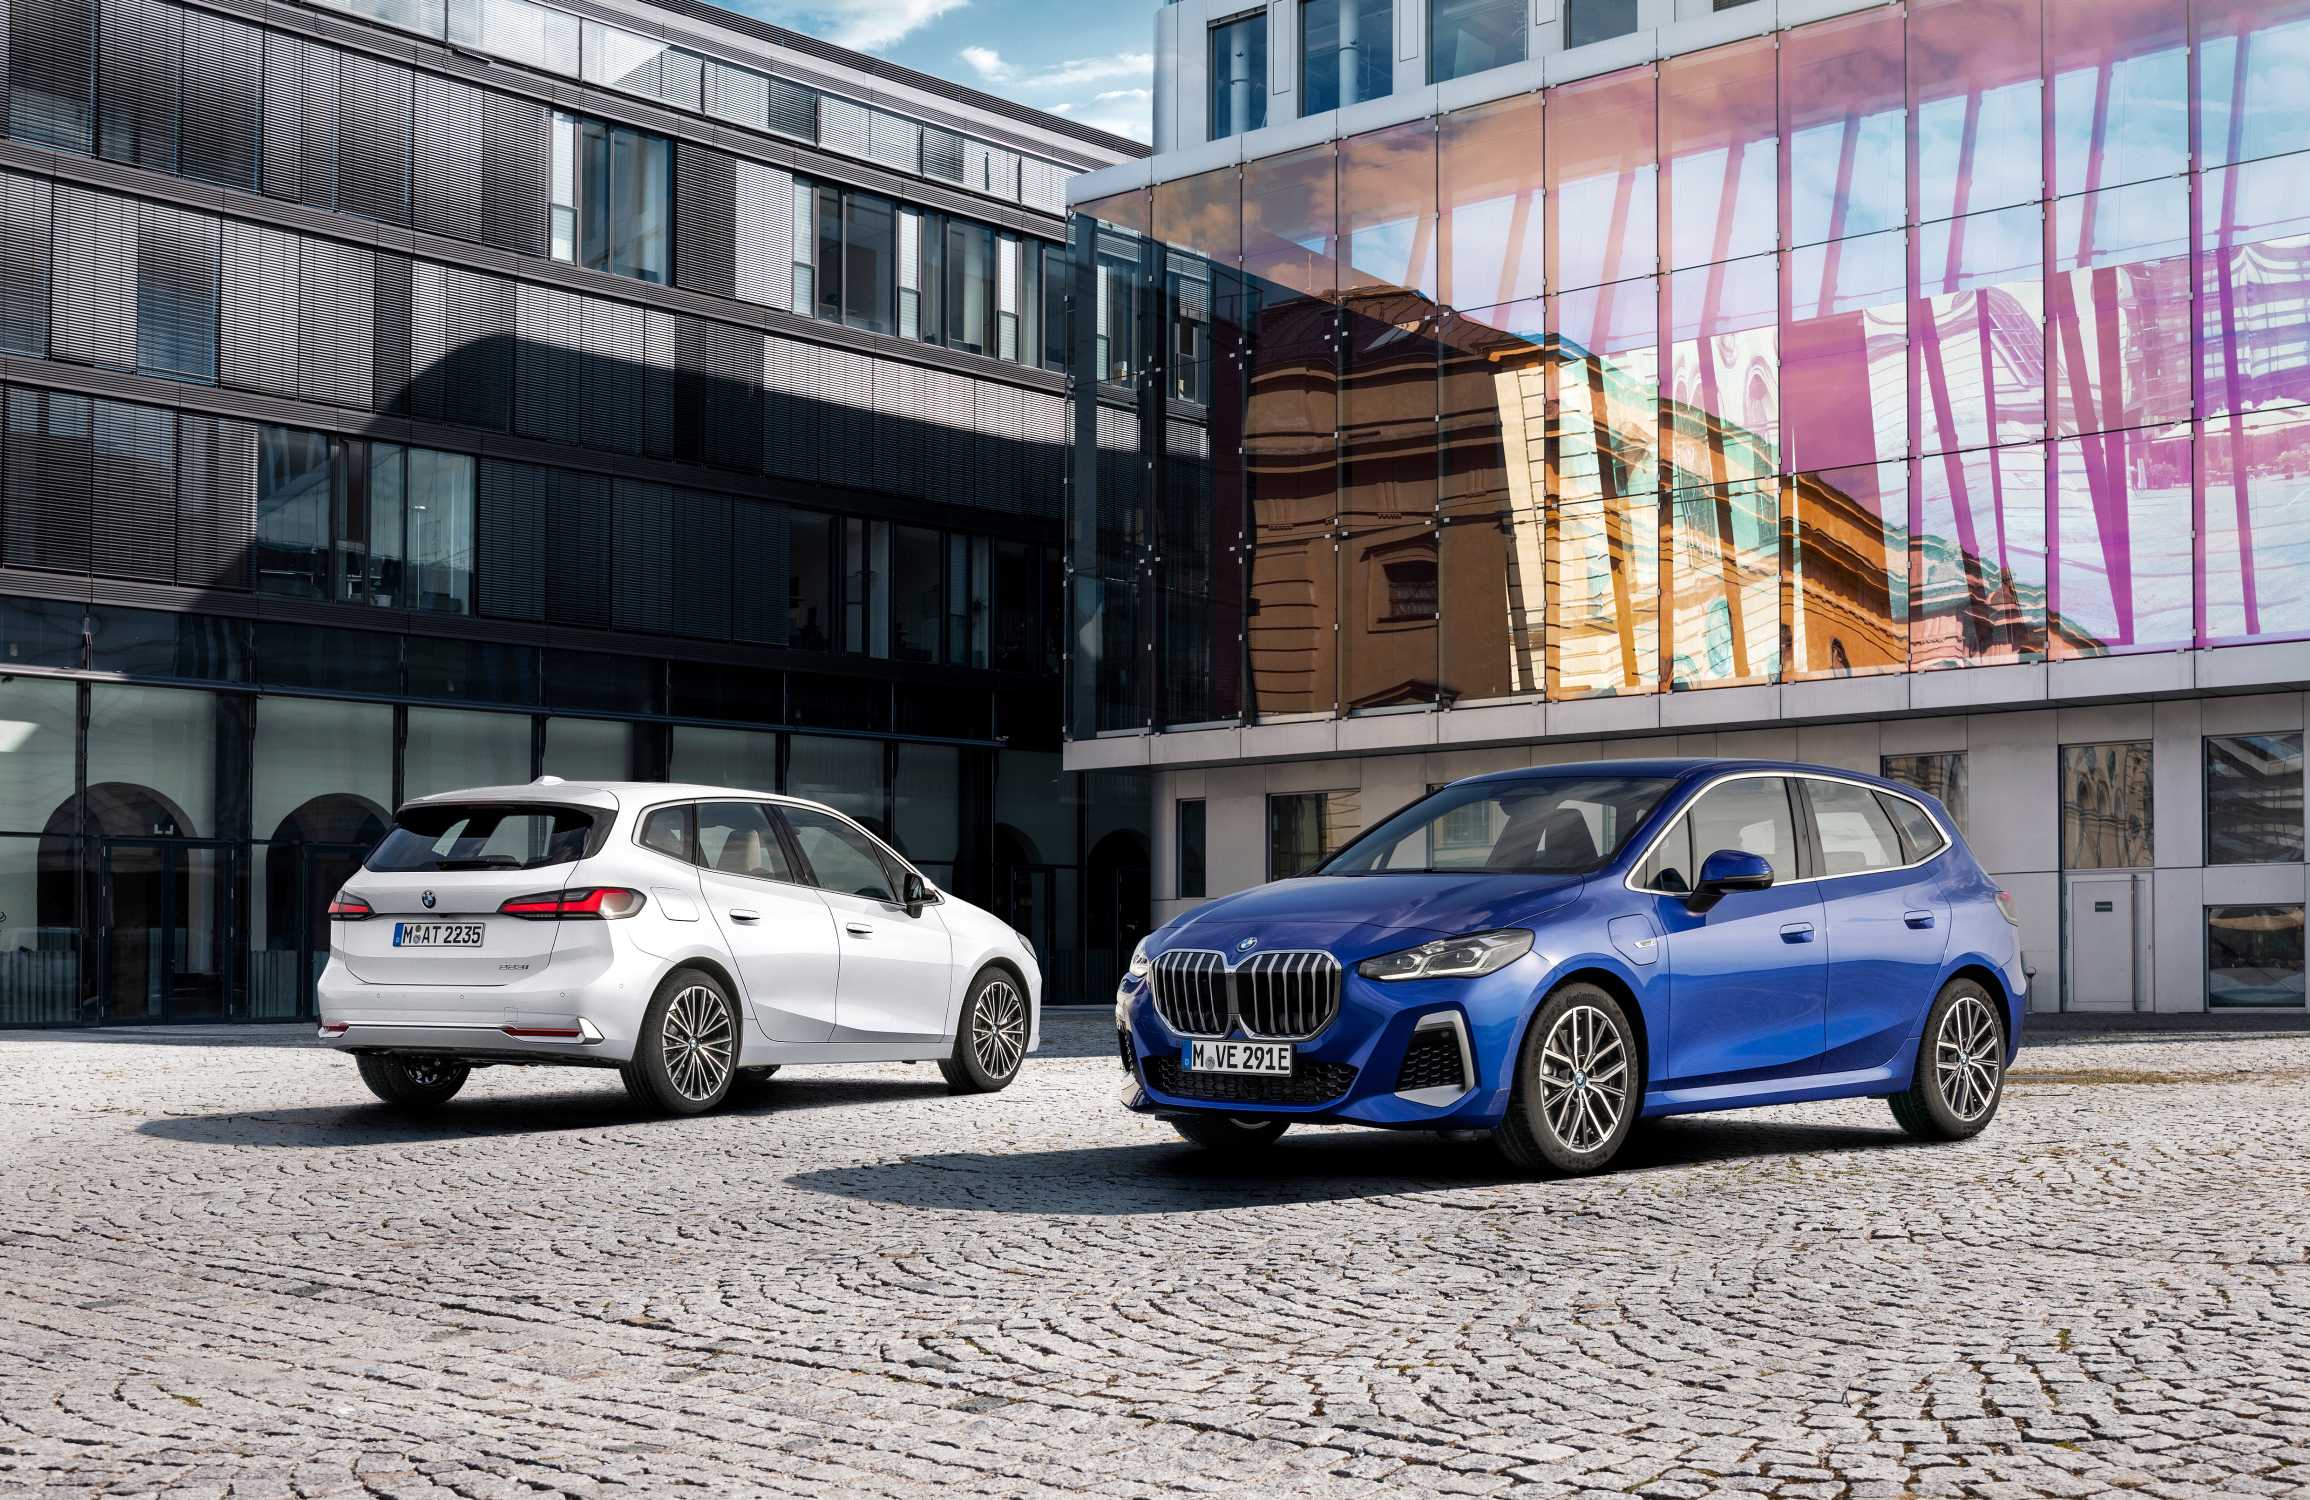 The all-new BMW 2 Series Active Tourer.